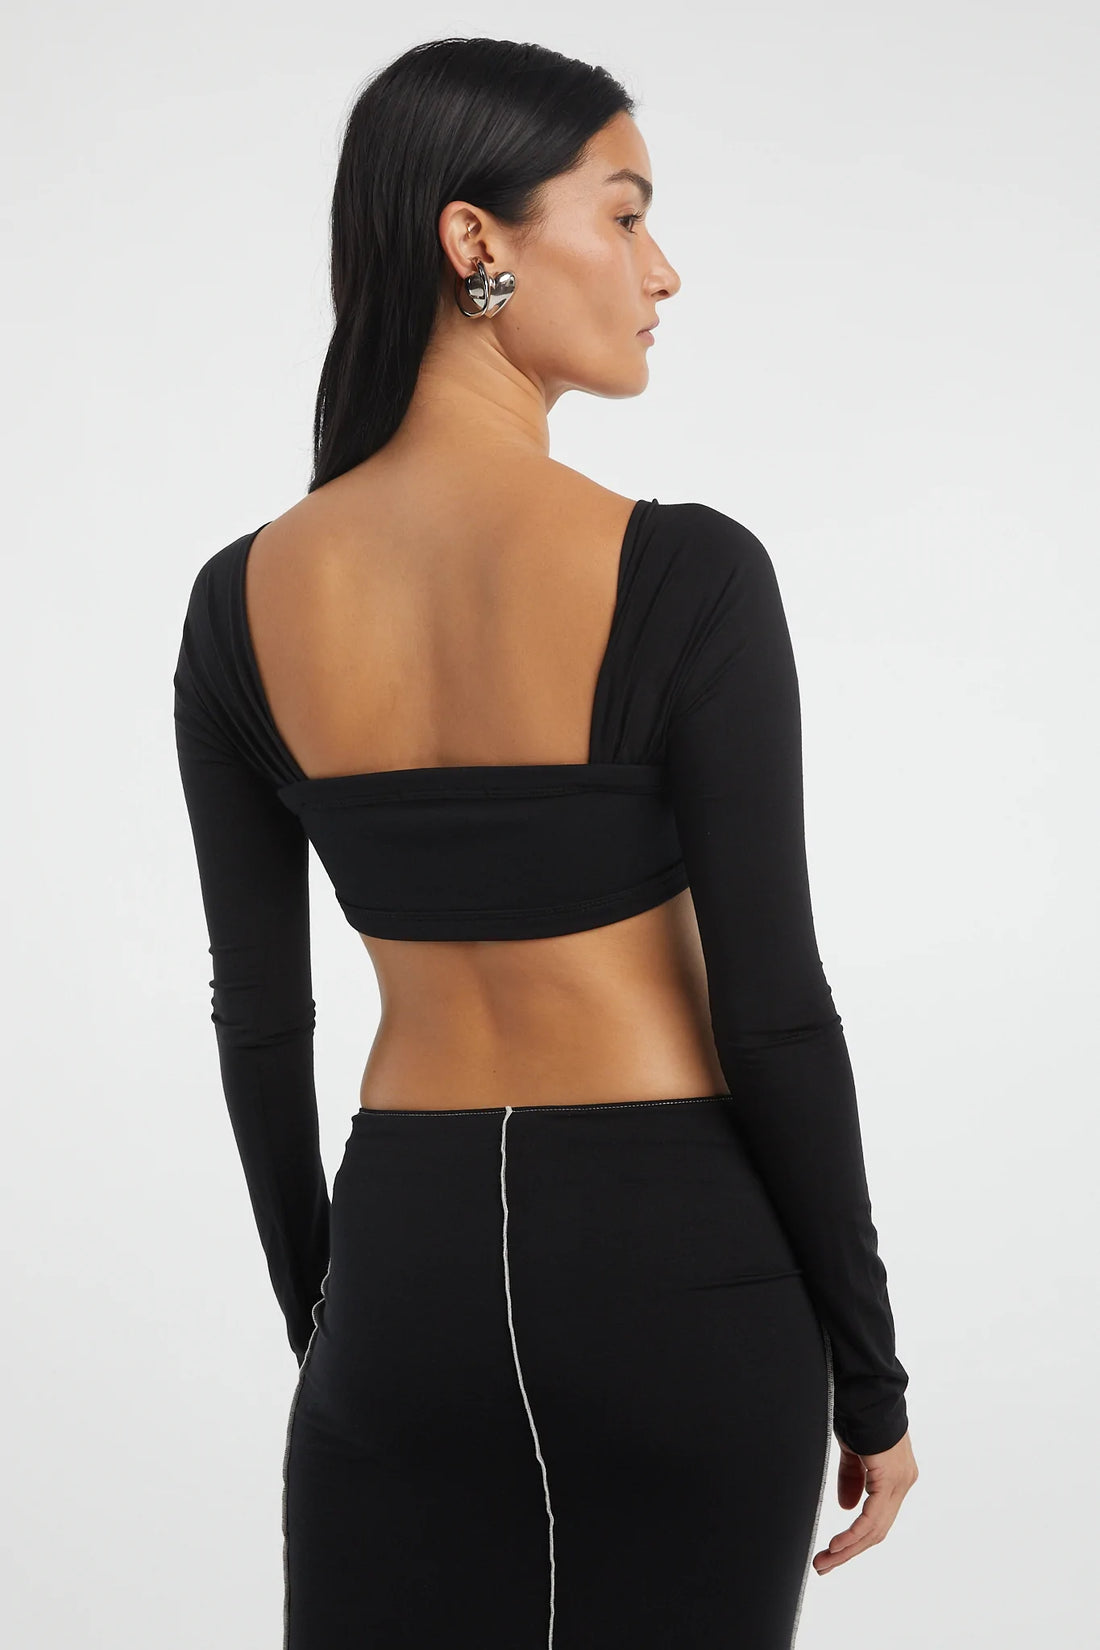 The Line By K Miro Top - Black